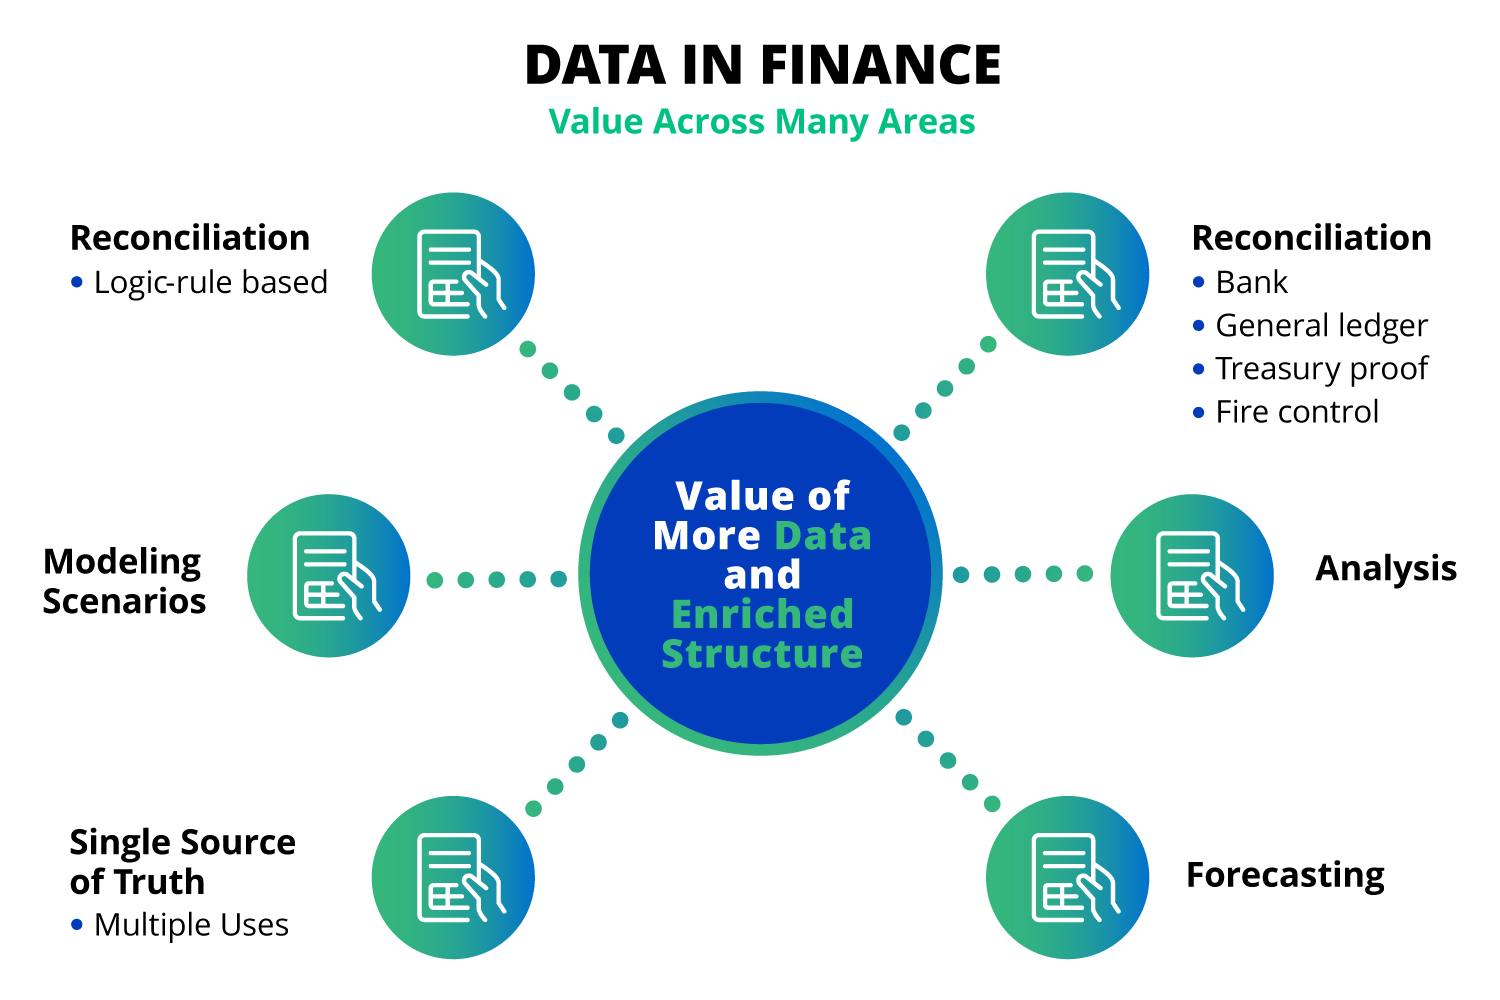 Data in Finance: Value Across Many Areas